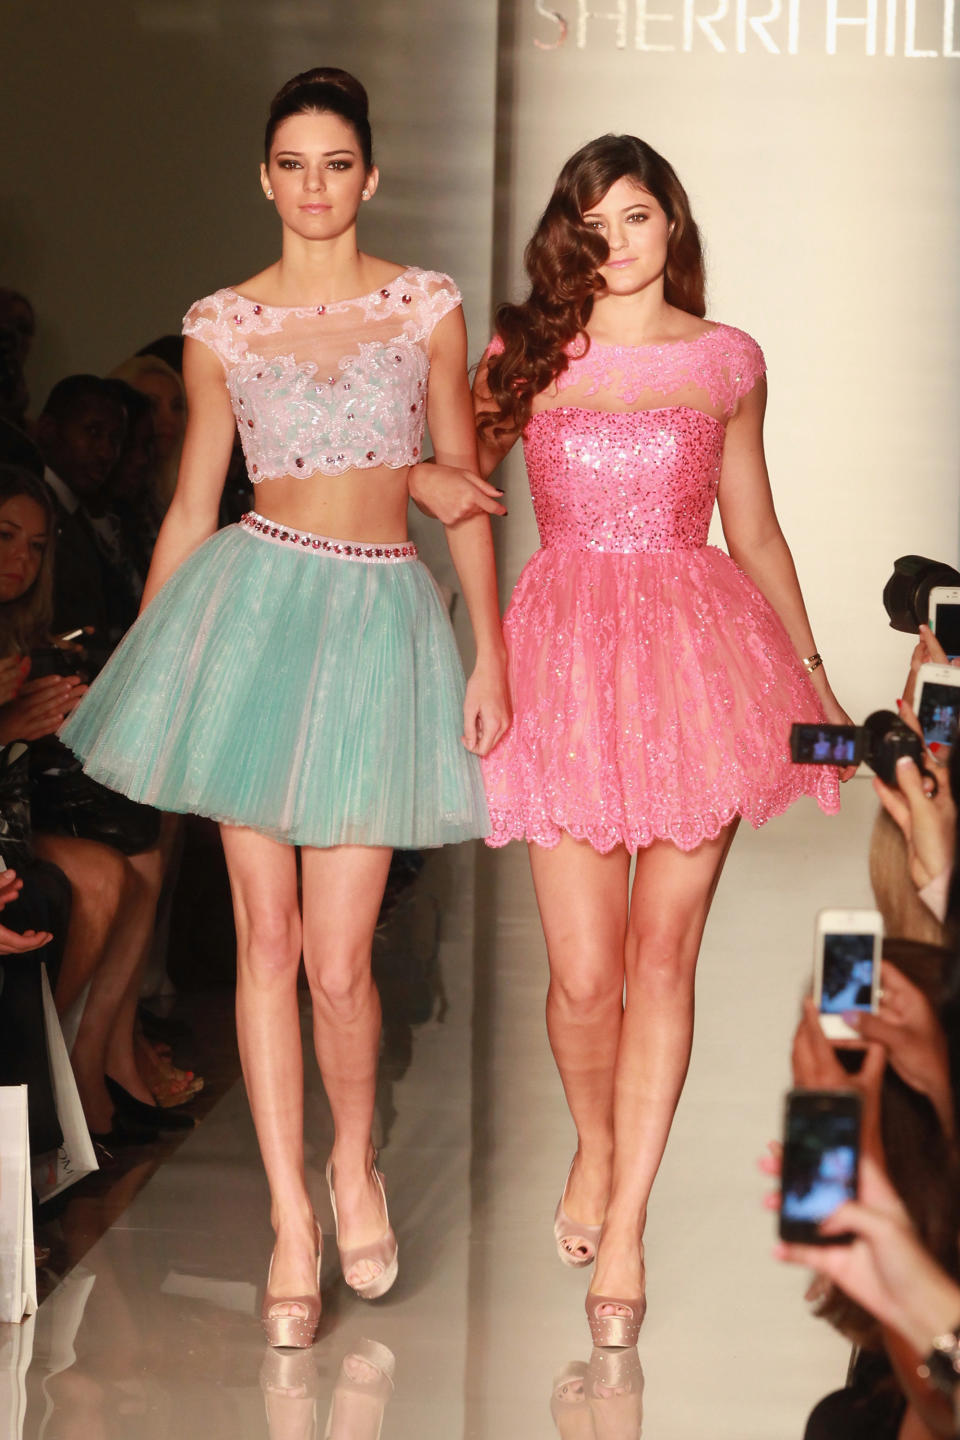 Kendall and Kylie Jenner walk the runway at the Evening Sherri Hill spring 2013 fashion show during Mercedes-Benz Fashion Week at Trump Tower Grand Corridor on September 7, 2012 in New York City.